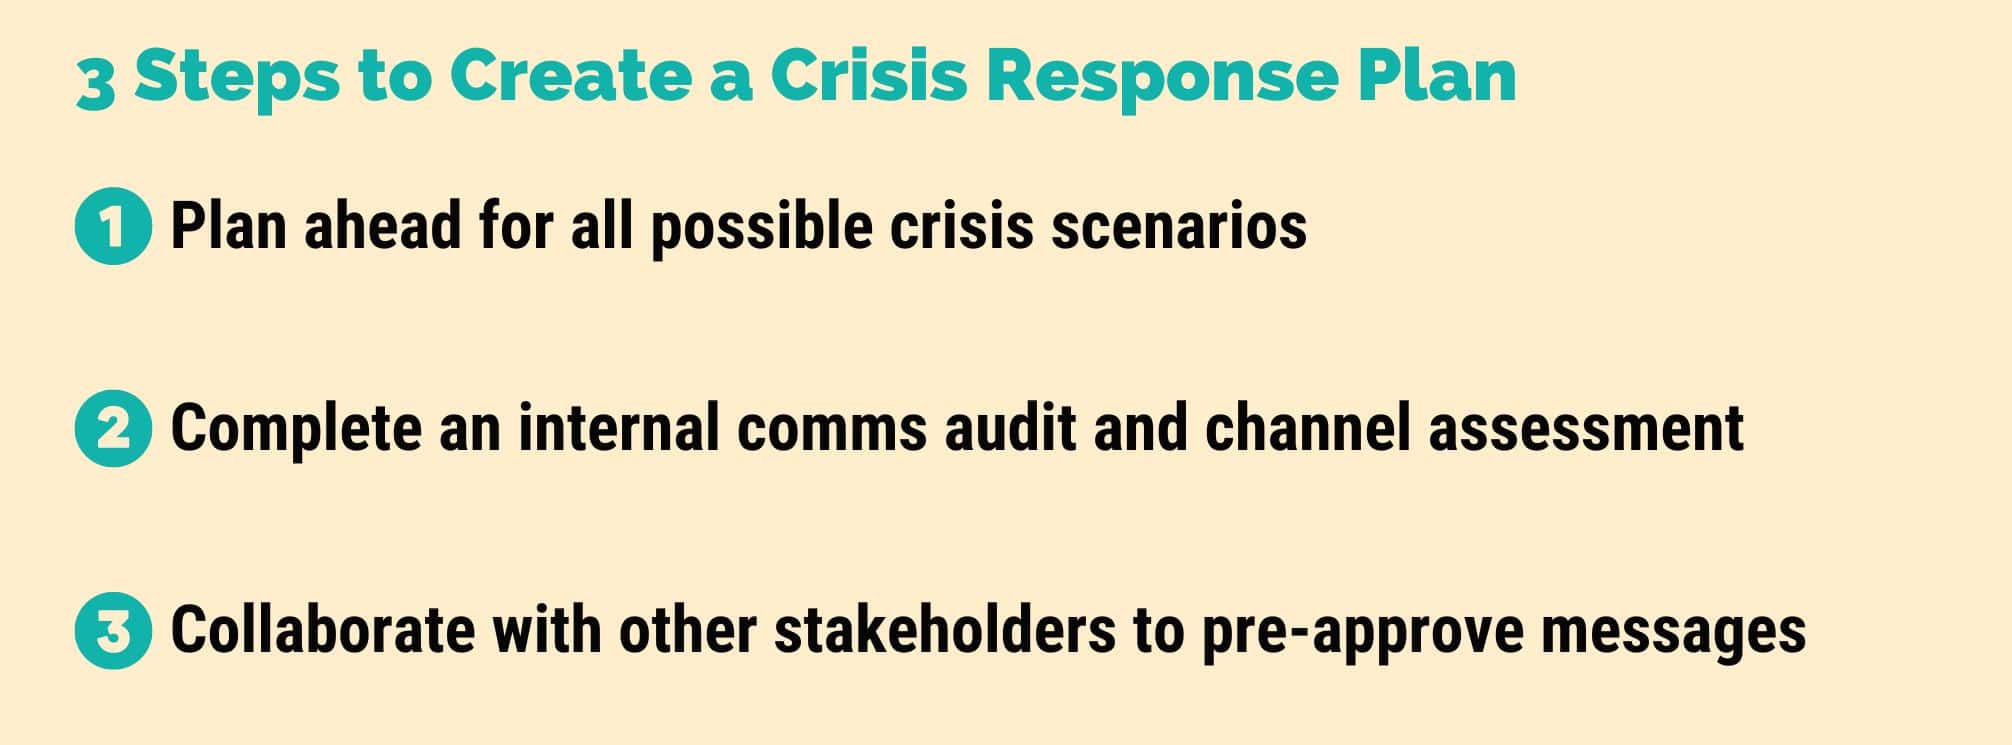 Text-based graphic that says "3 steps to create a crisis response plan" and then lists the three steps from the blog.